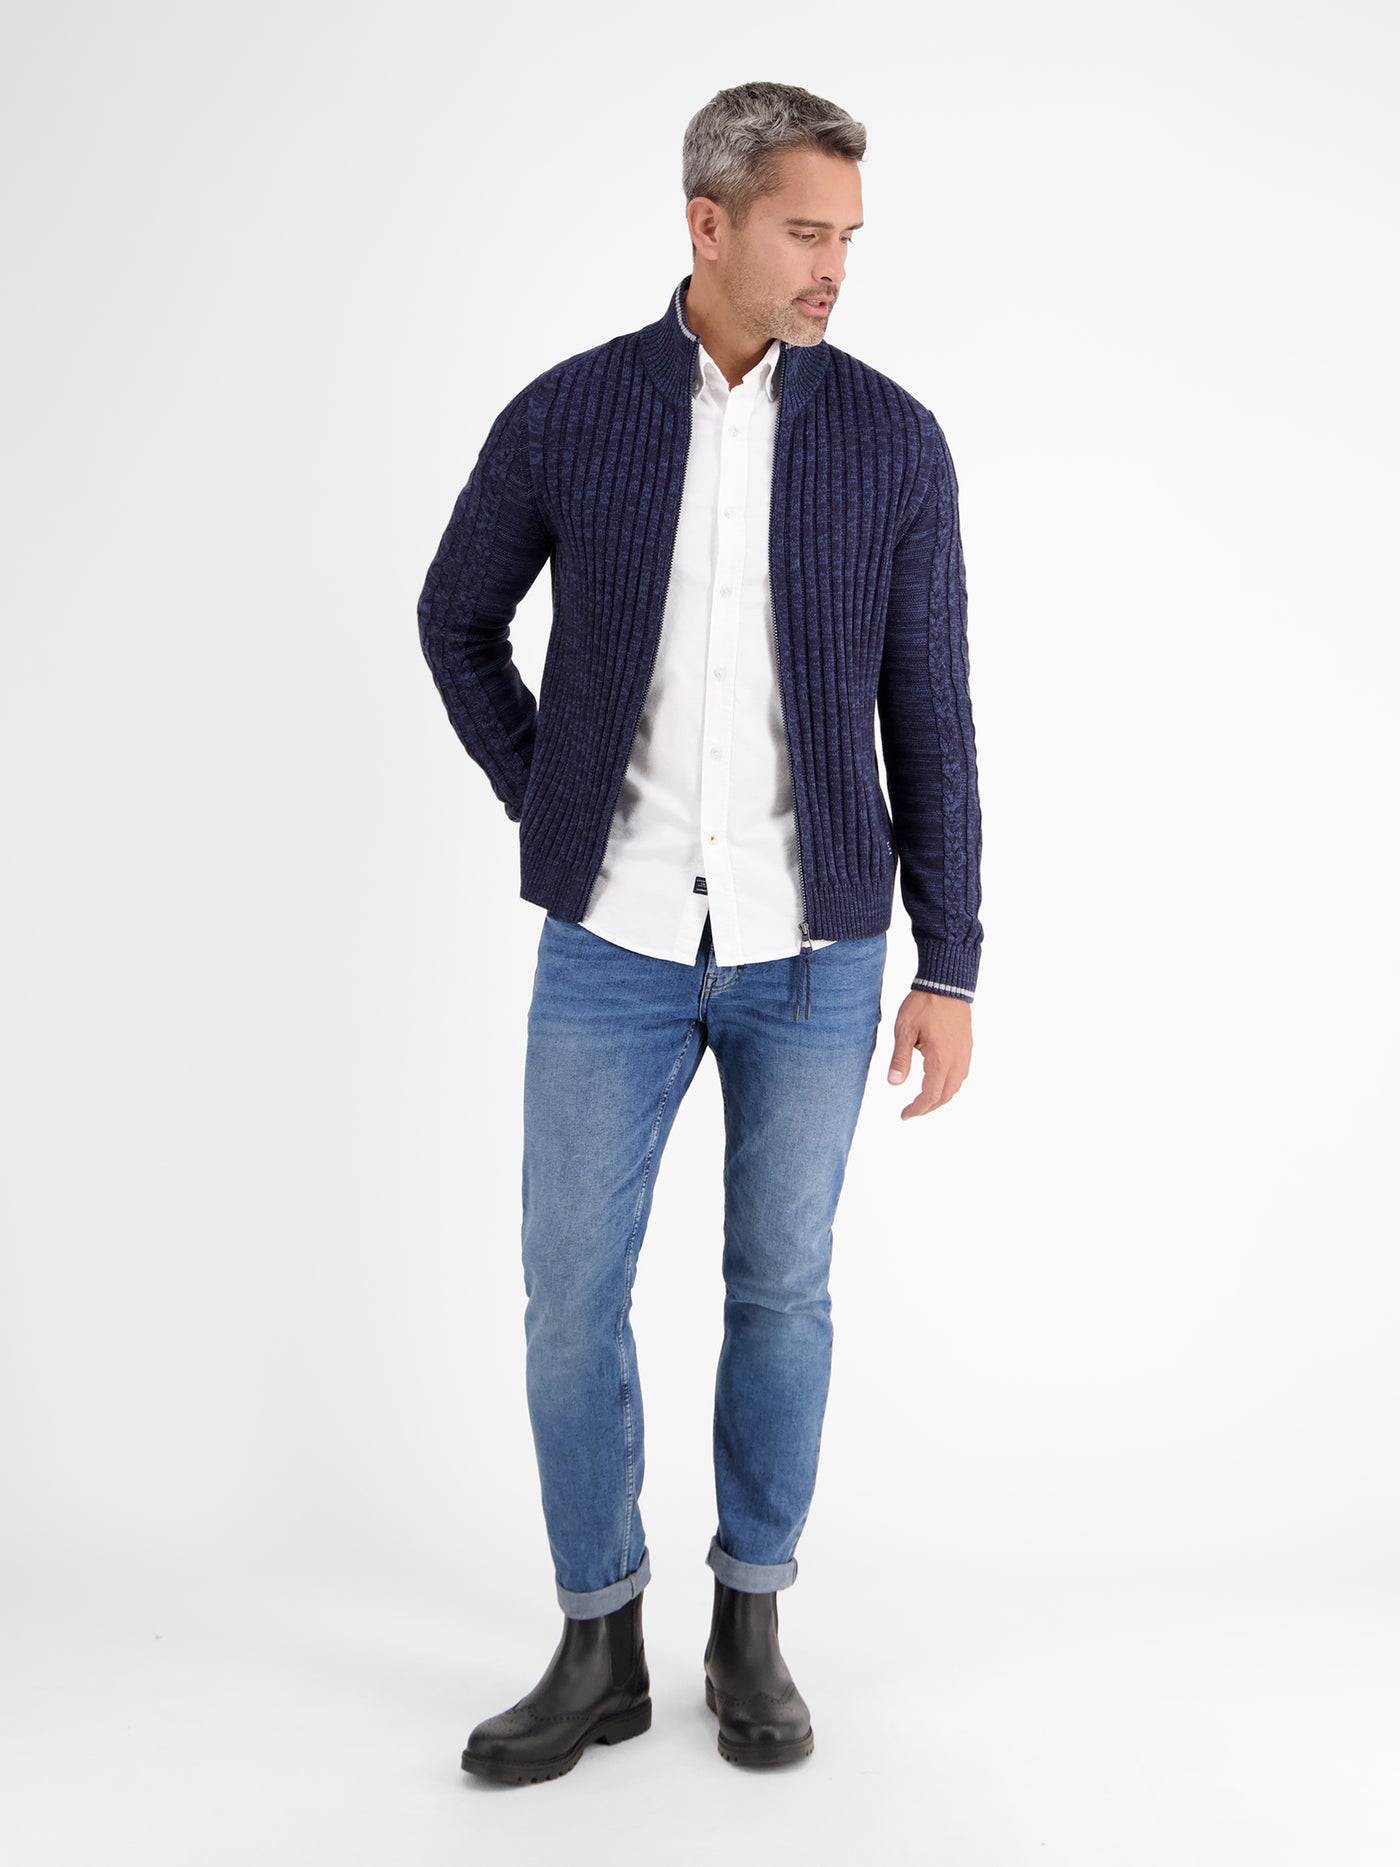 Cardigan, wide ribbed with stand-up collar